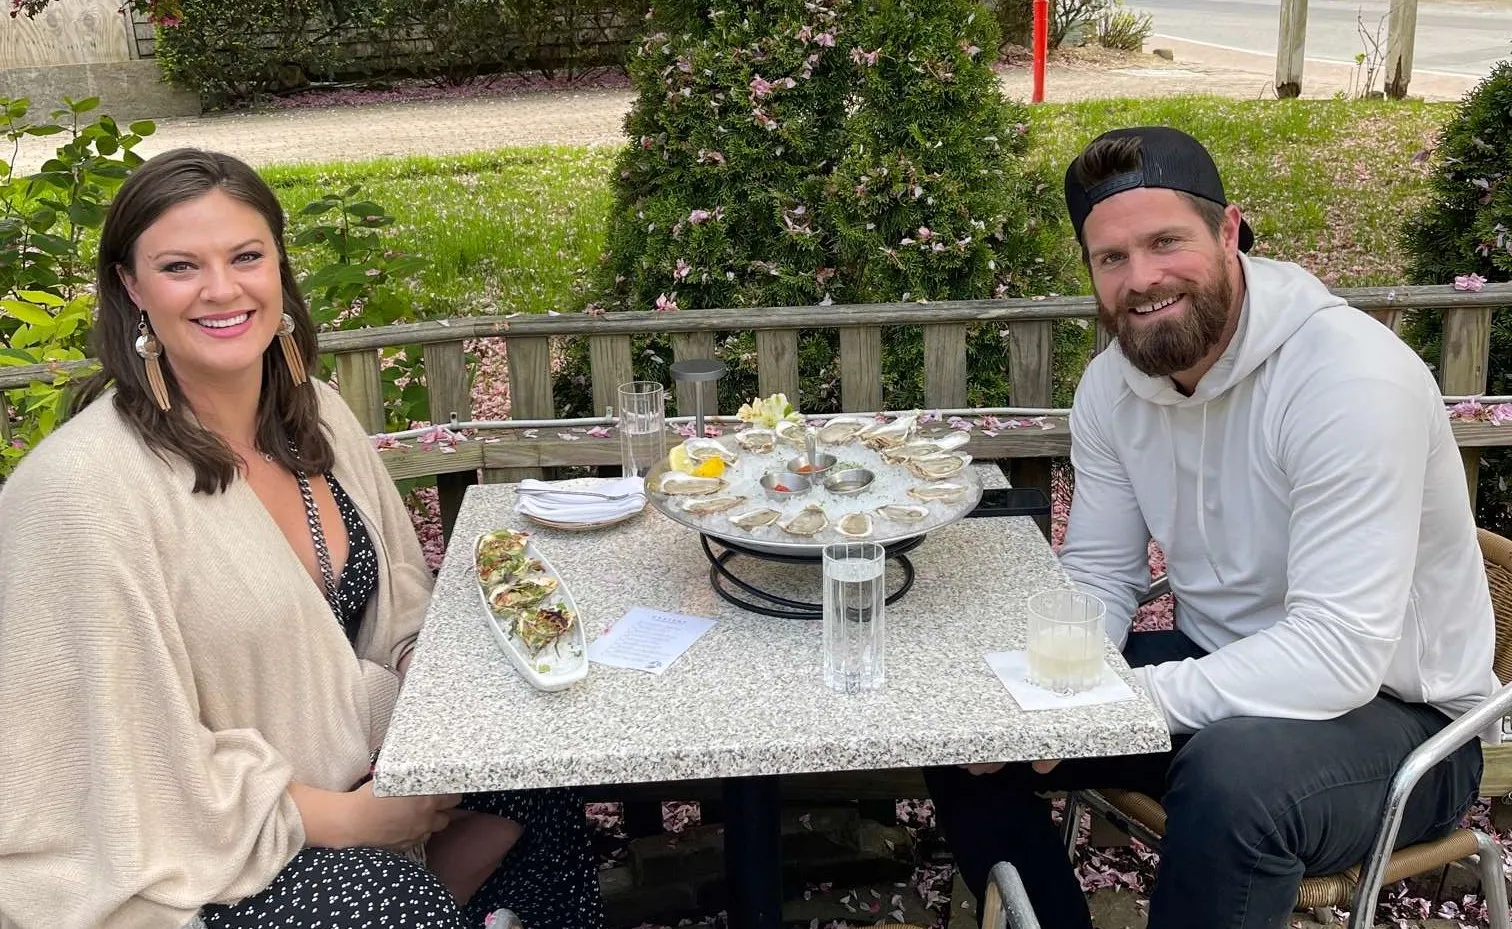 Ayla Brown and Rob Bellamy at a table eating oysters